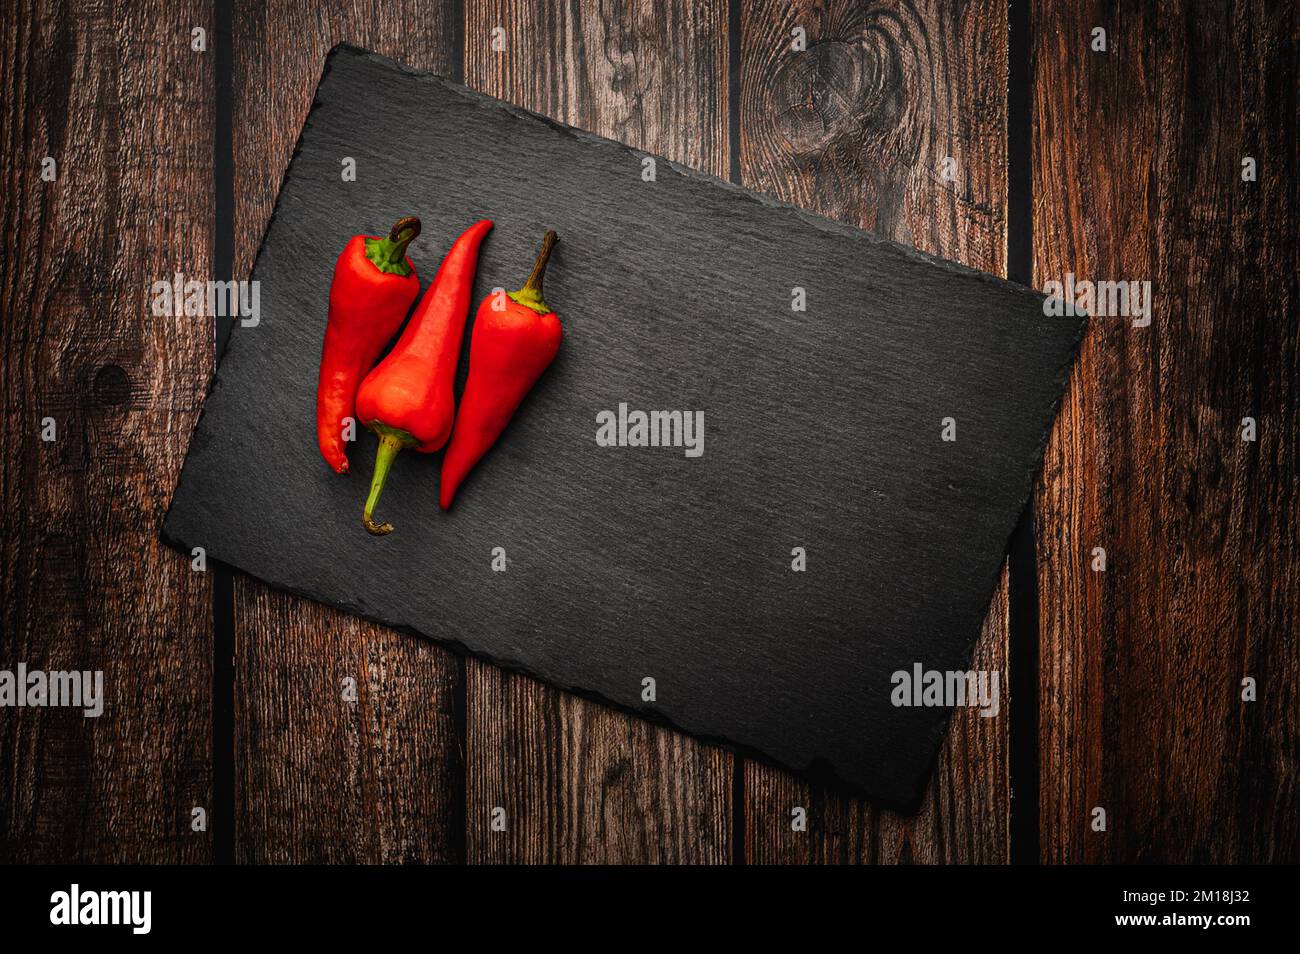 Red hot chili peppers on a slate board on a dark wooden table. Top down overhead view. Stock Photo